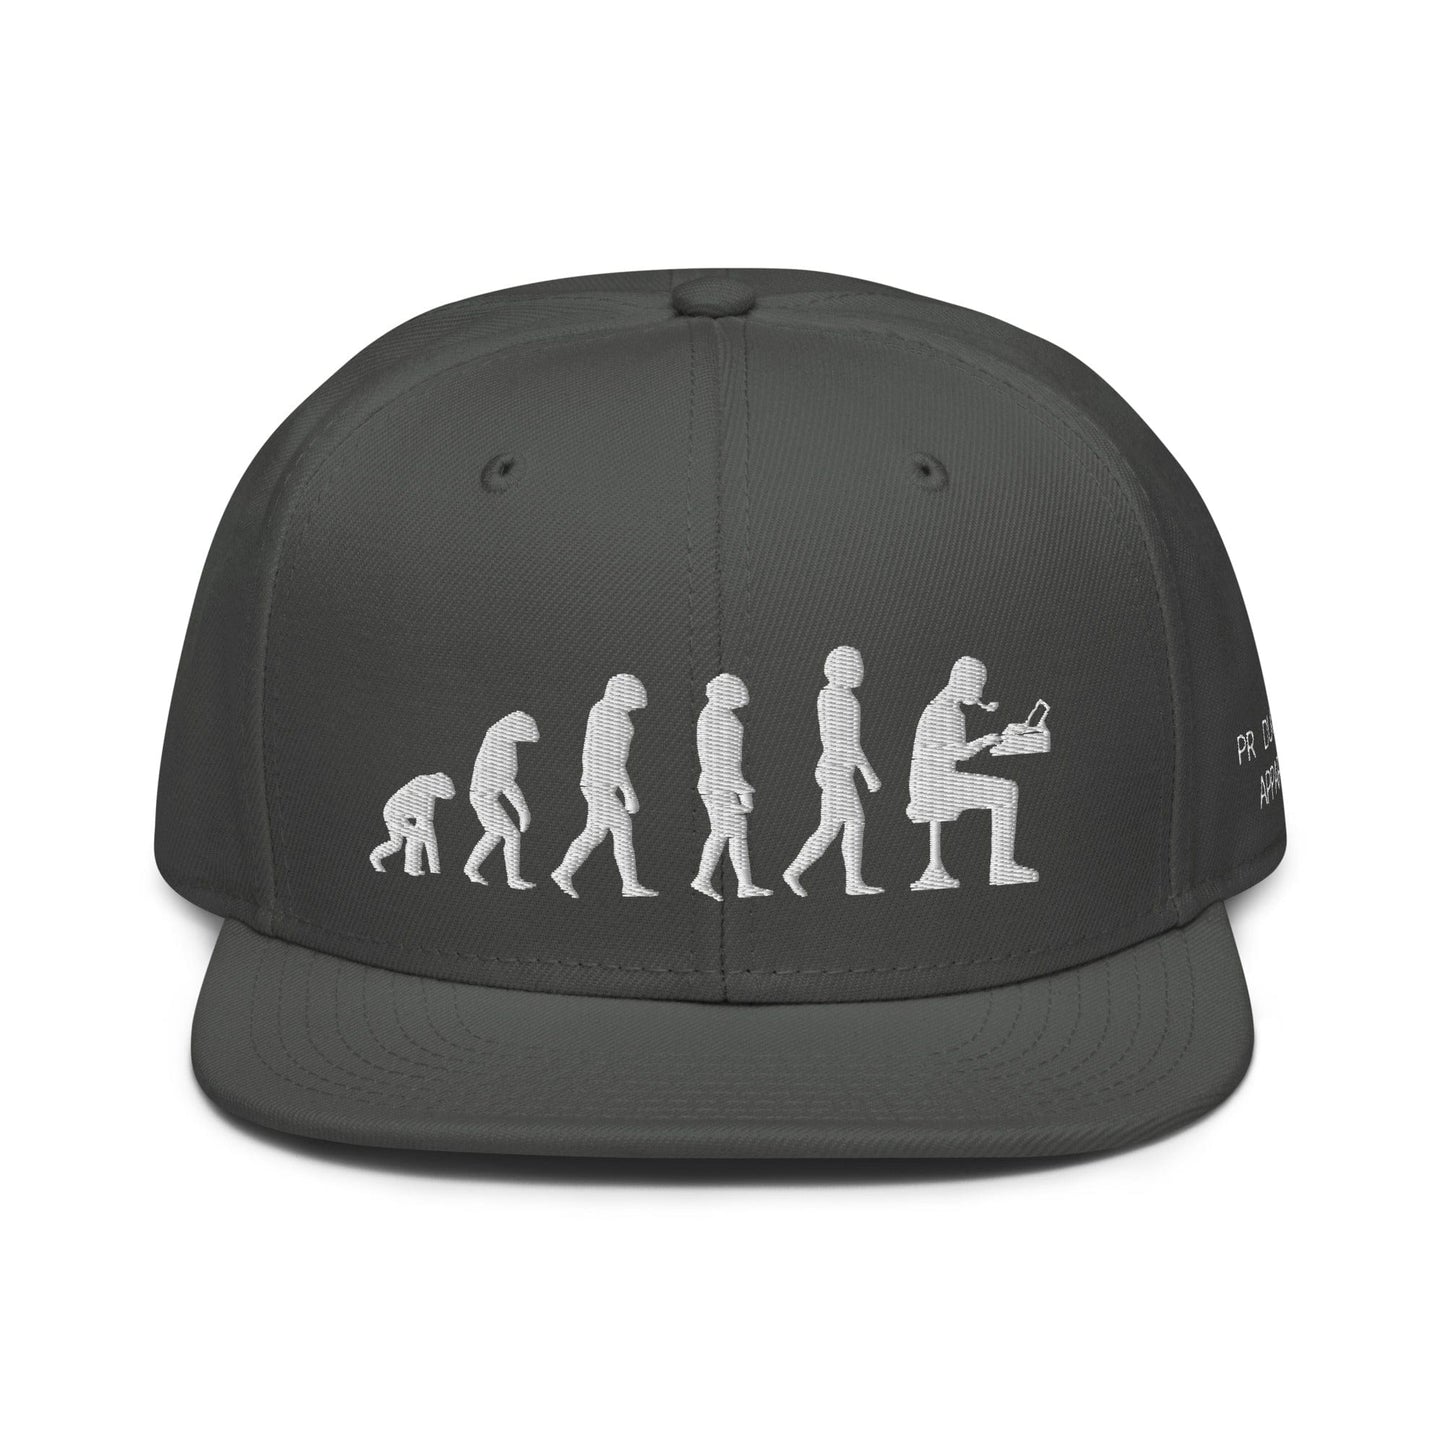 Production Apparel Writer Evolution Hat Charcoal gray